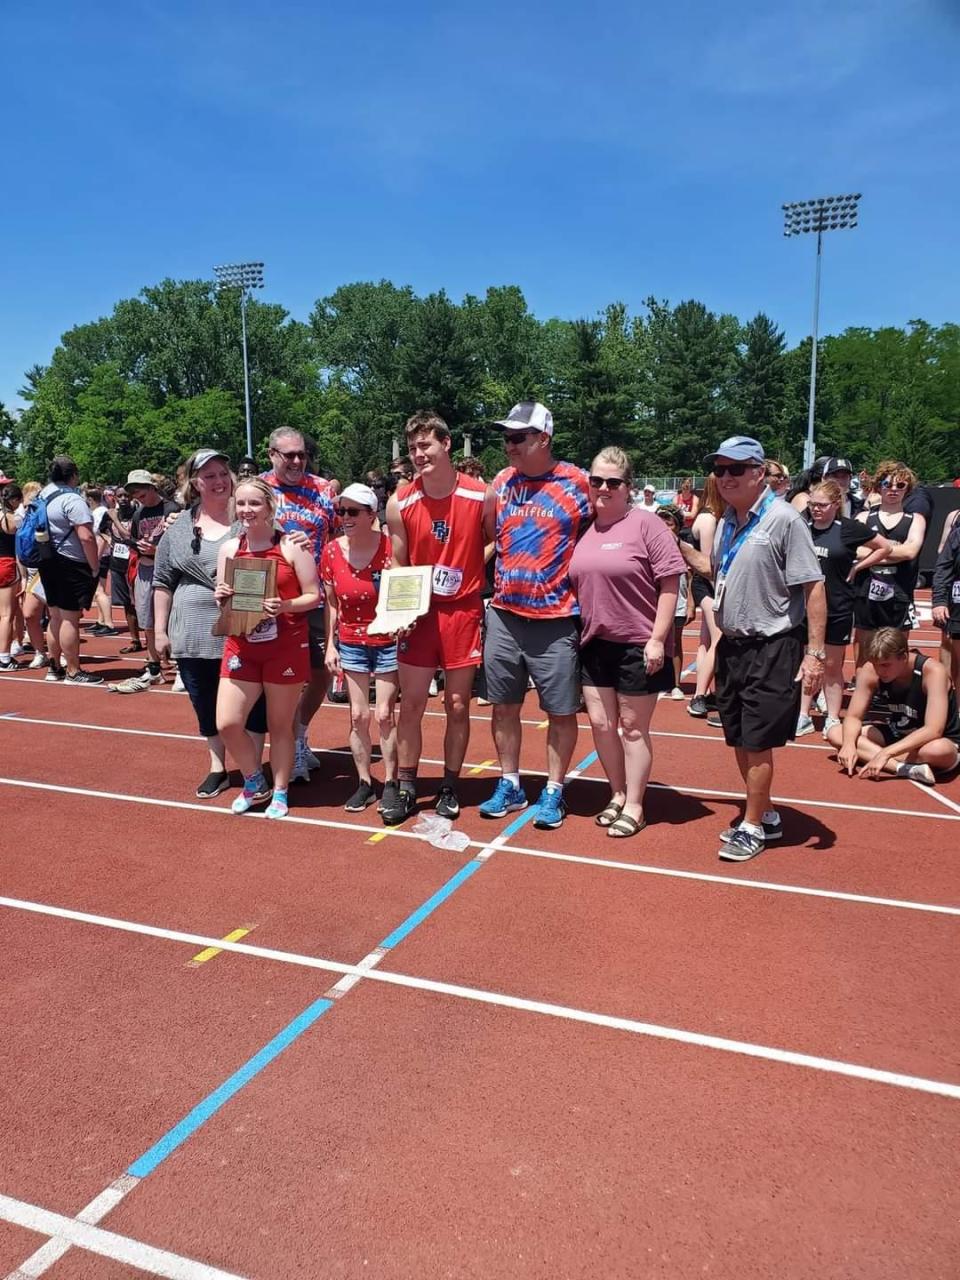 BNL seniors Jesselyn Fisher and Tanner Robbins are surrounded by their families as they receive the 2022 Mental Attitude Awards at Satuday's Unified Track & Field State Finals in Bloomington.